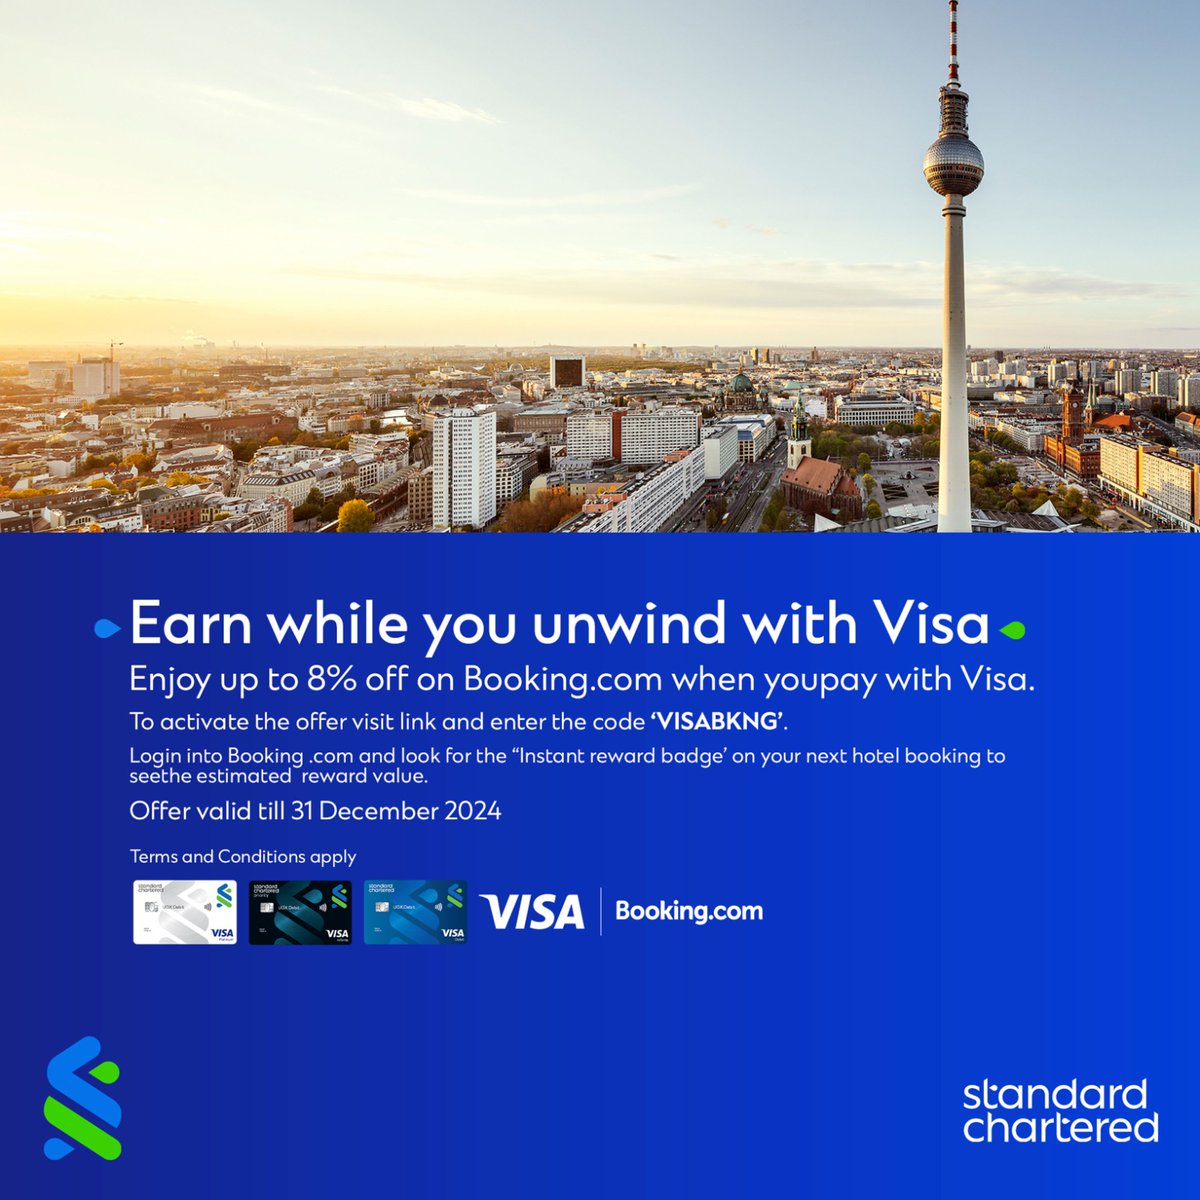 Travelling just got more rewarding with Visa! Simply use code VISABNKG on Booking.com and enjoy up to 8% off your accommodations. Pack your bags and let the savings begin! #TravelMoreWithVisa #HereForGood